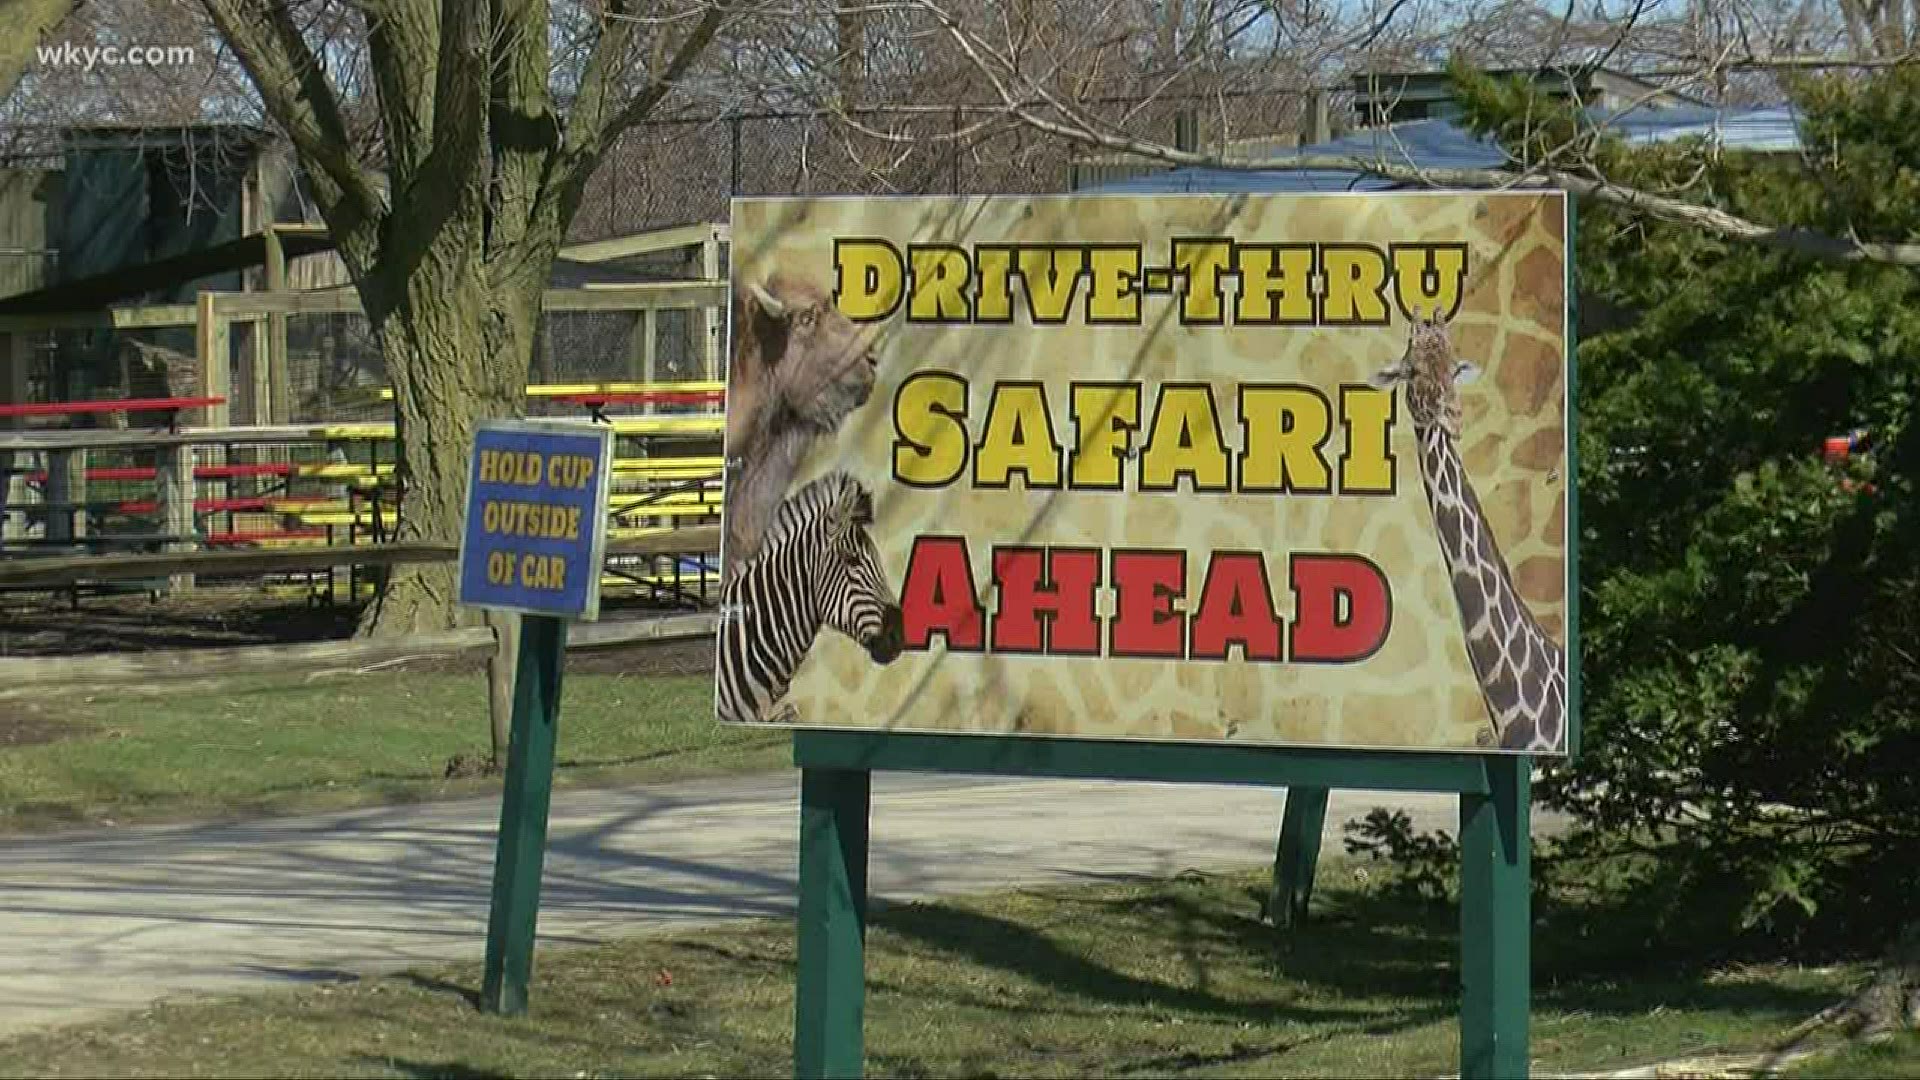 The Port Clinton drive-thru attraction features more than 400 animals that the entire family can feed.